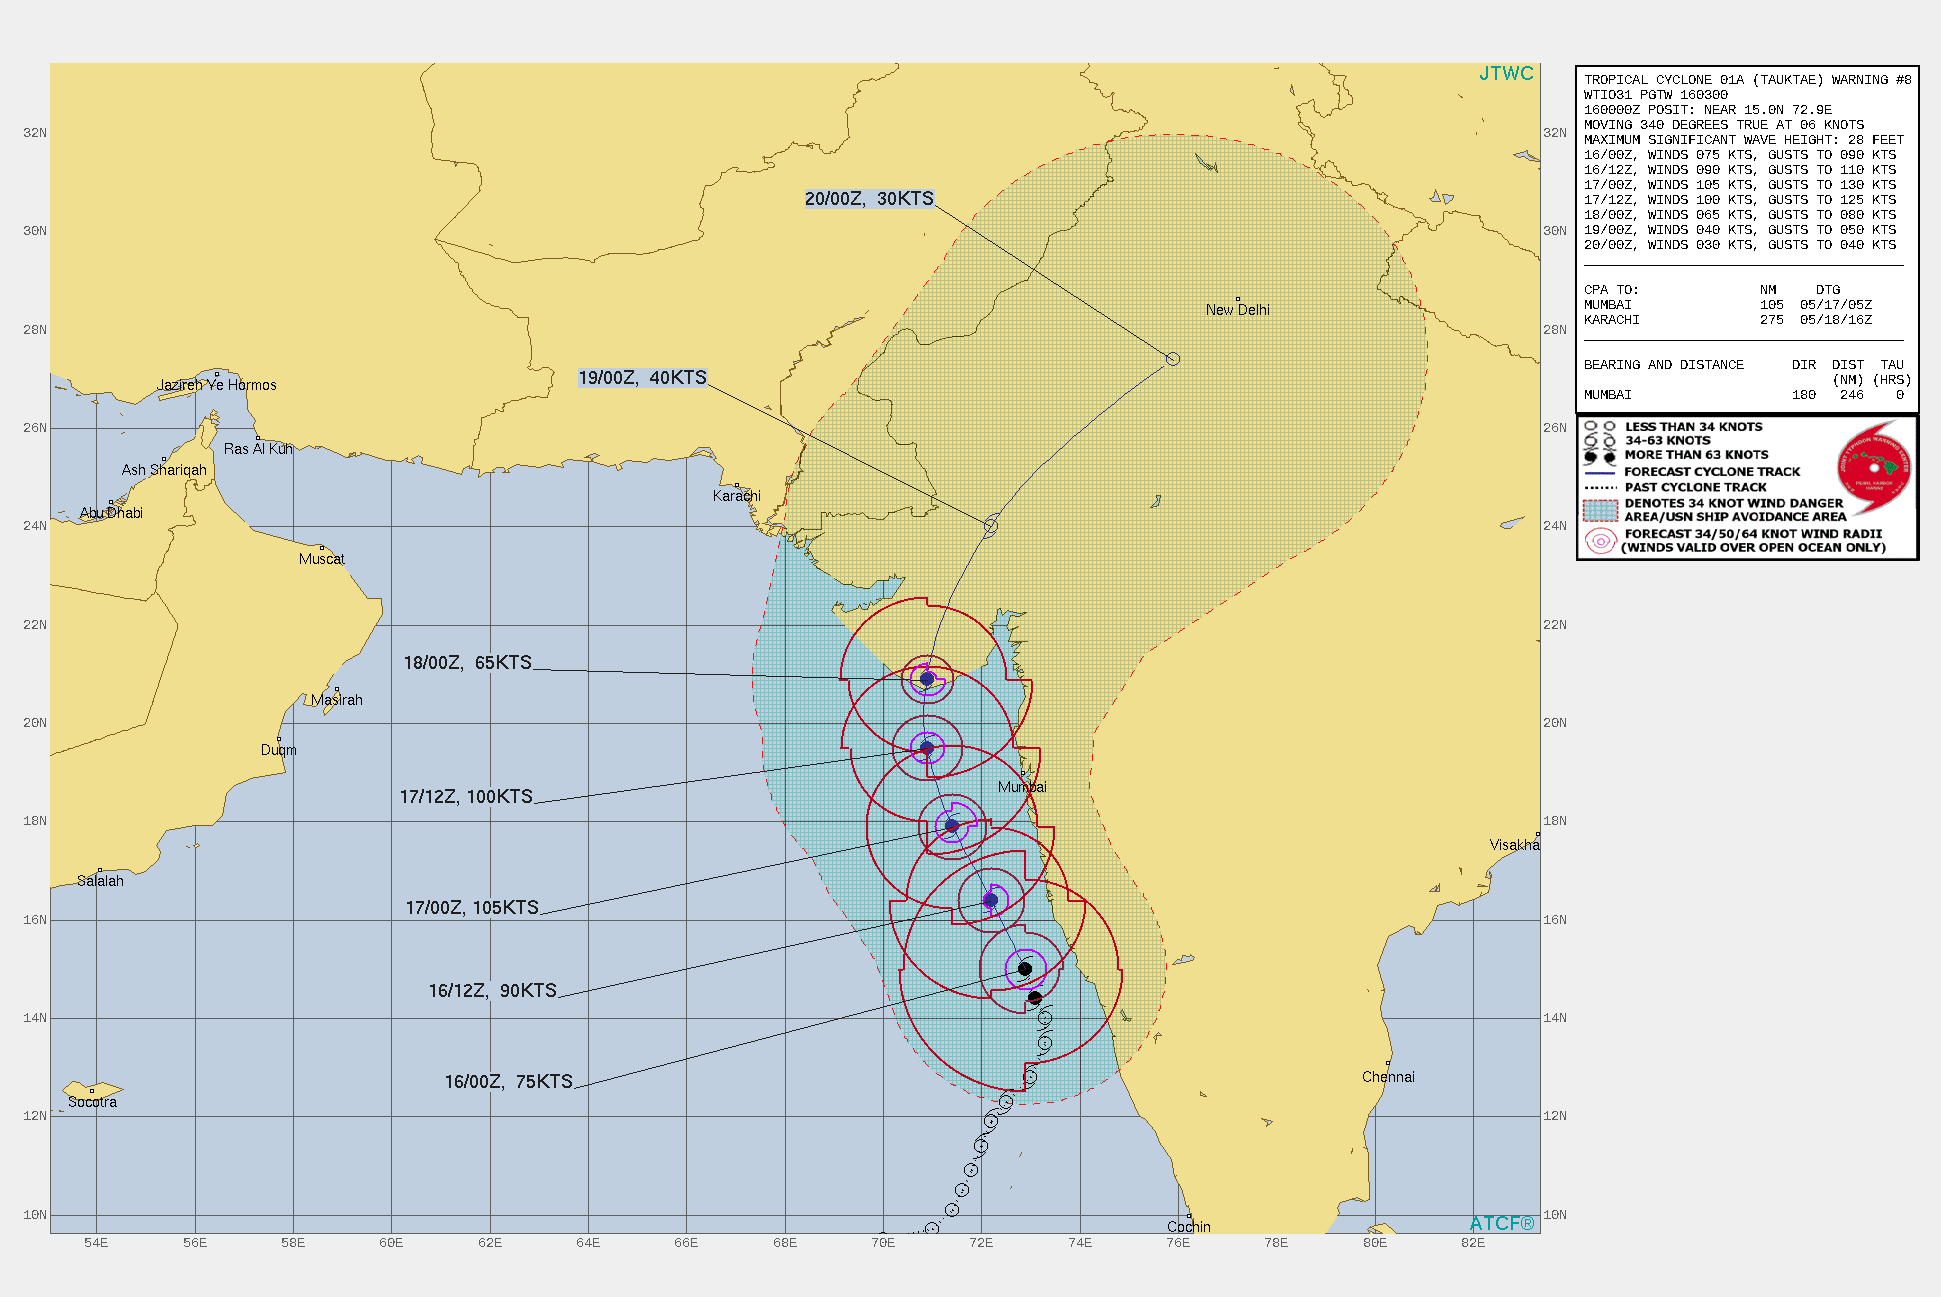 TC 01A. WARNING 8 ISSUED AT 16/03UTC. ANALYSIS INDICATES FAVORABLE ENVIRONMENTAL  CONDITIONS WITH ROBUST POLEWARD OUTFLOW, LOW VERTICAL WIND SHEAR ALOFT;  AND WARM (31C) SEA SURFACE TEMPERATURE. TC 01A WILL  CONTINUE ON ITS CURRENT TRACK THROUGH 36H ALONG THE WESTERN  PERIPHERY OF A DEEP-LAYERED SUBTROPICAL RIDGE TO THE EAST.  AFTERWARD, IT WILL TRACK MORE NORTHWARD AND ROUND THE RIDGE AXIS  BEFORE MAKING LANDFALL NEAR VANAKBARA, INDIA SHORTLY AROUND 48H.  THE POSSIBILITY OF RAPID INTENSIFICATION REMAINS DURING THE NEXT 24  HOURS, FUELED BY THE FAVORABLE ENVIRONMENTAL CONDITIONS, REACHING A  PEAK INTENSITY OF 105 KNOTS/ US CAT 3 BY 24H. AFTERWARD, THE SYSTEM WILL  BEGIN TO WEAKEN DUE TO LAND INTERACTION. AFTER LANDFALL, THE CYCLONE  WILL RAPIDLY ERODE AS IT TRACKS ACROSS THE RUGGED TERRAIN, LEADING  TO DISSIPATION BY 96H, POSSIBLY SOONER.